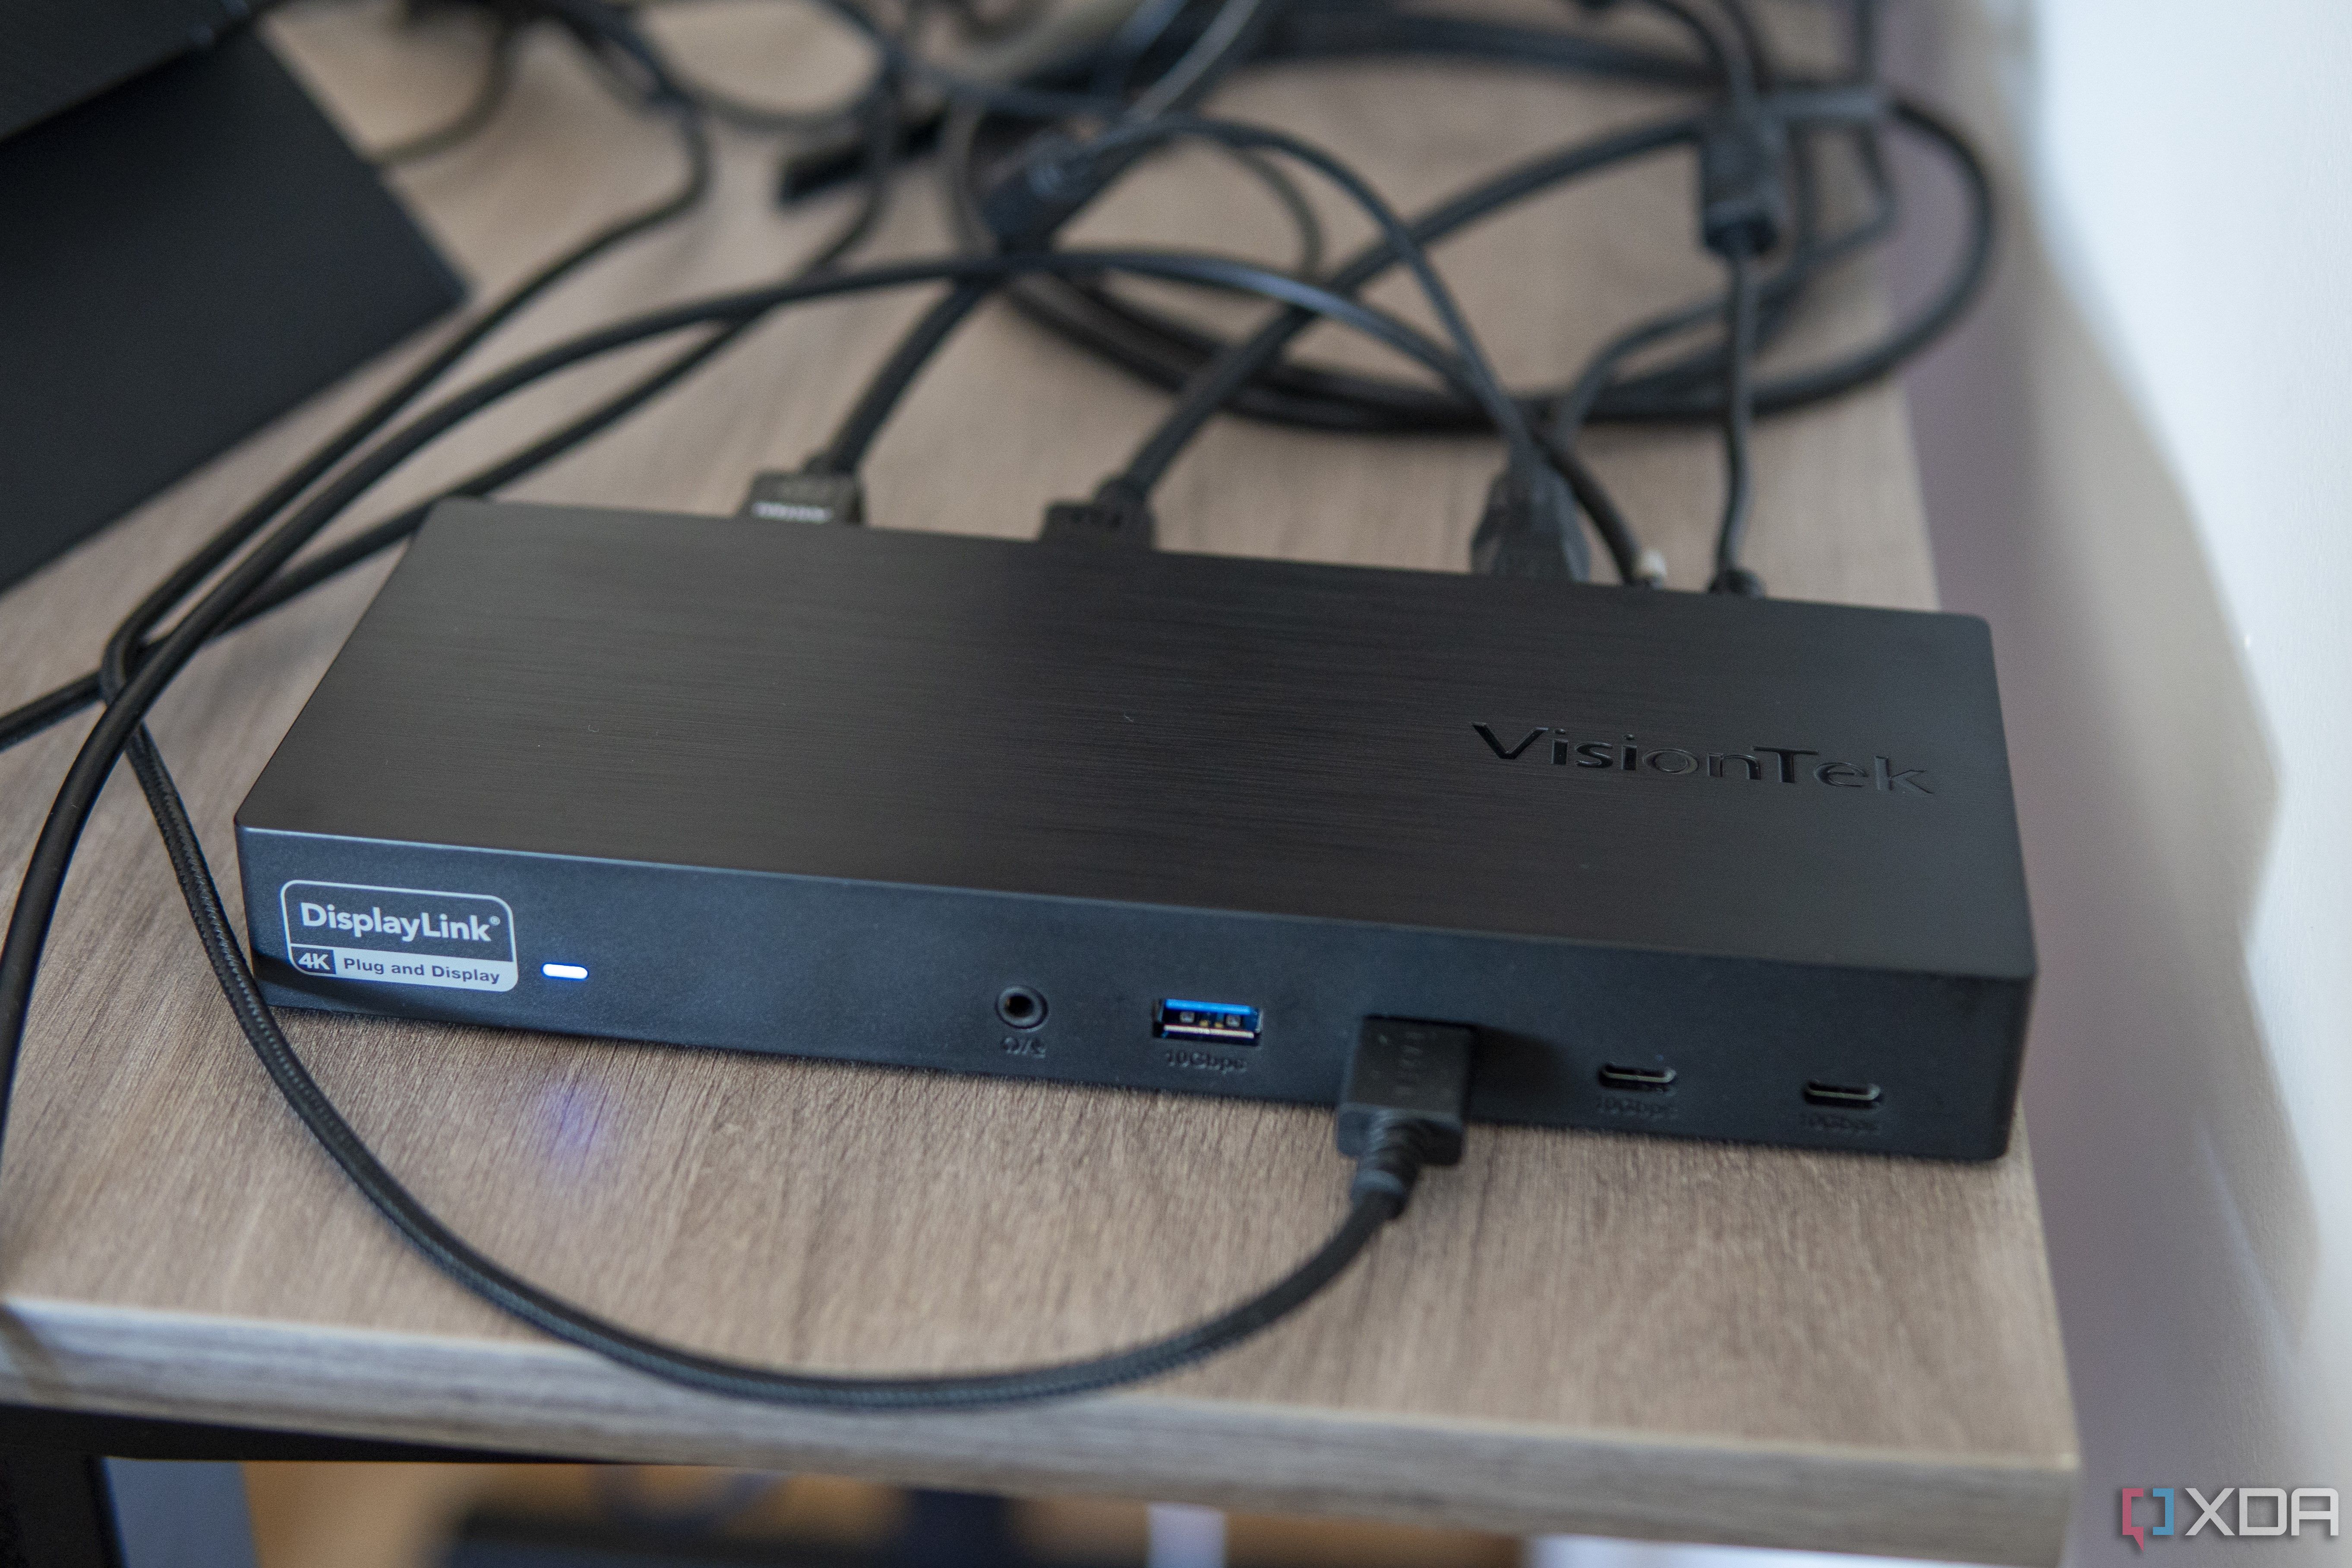 Angled view of the VisionTek VT7400 docking station with various peripherals connected